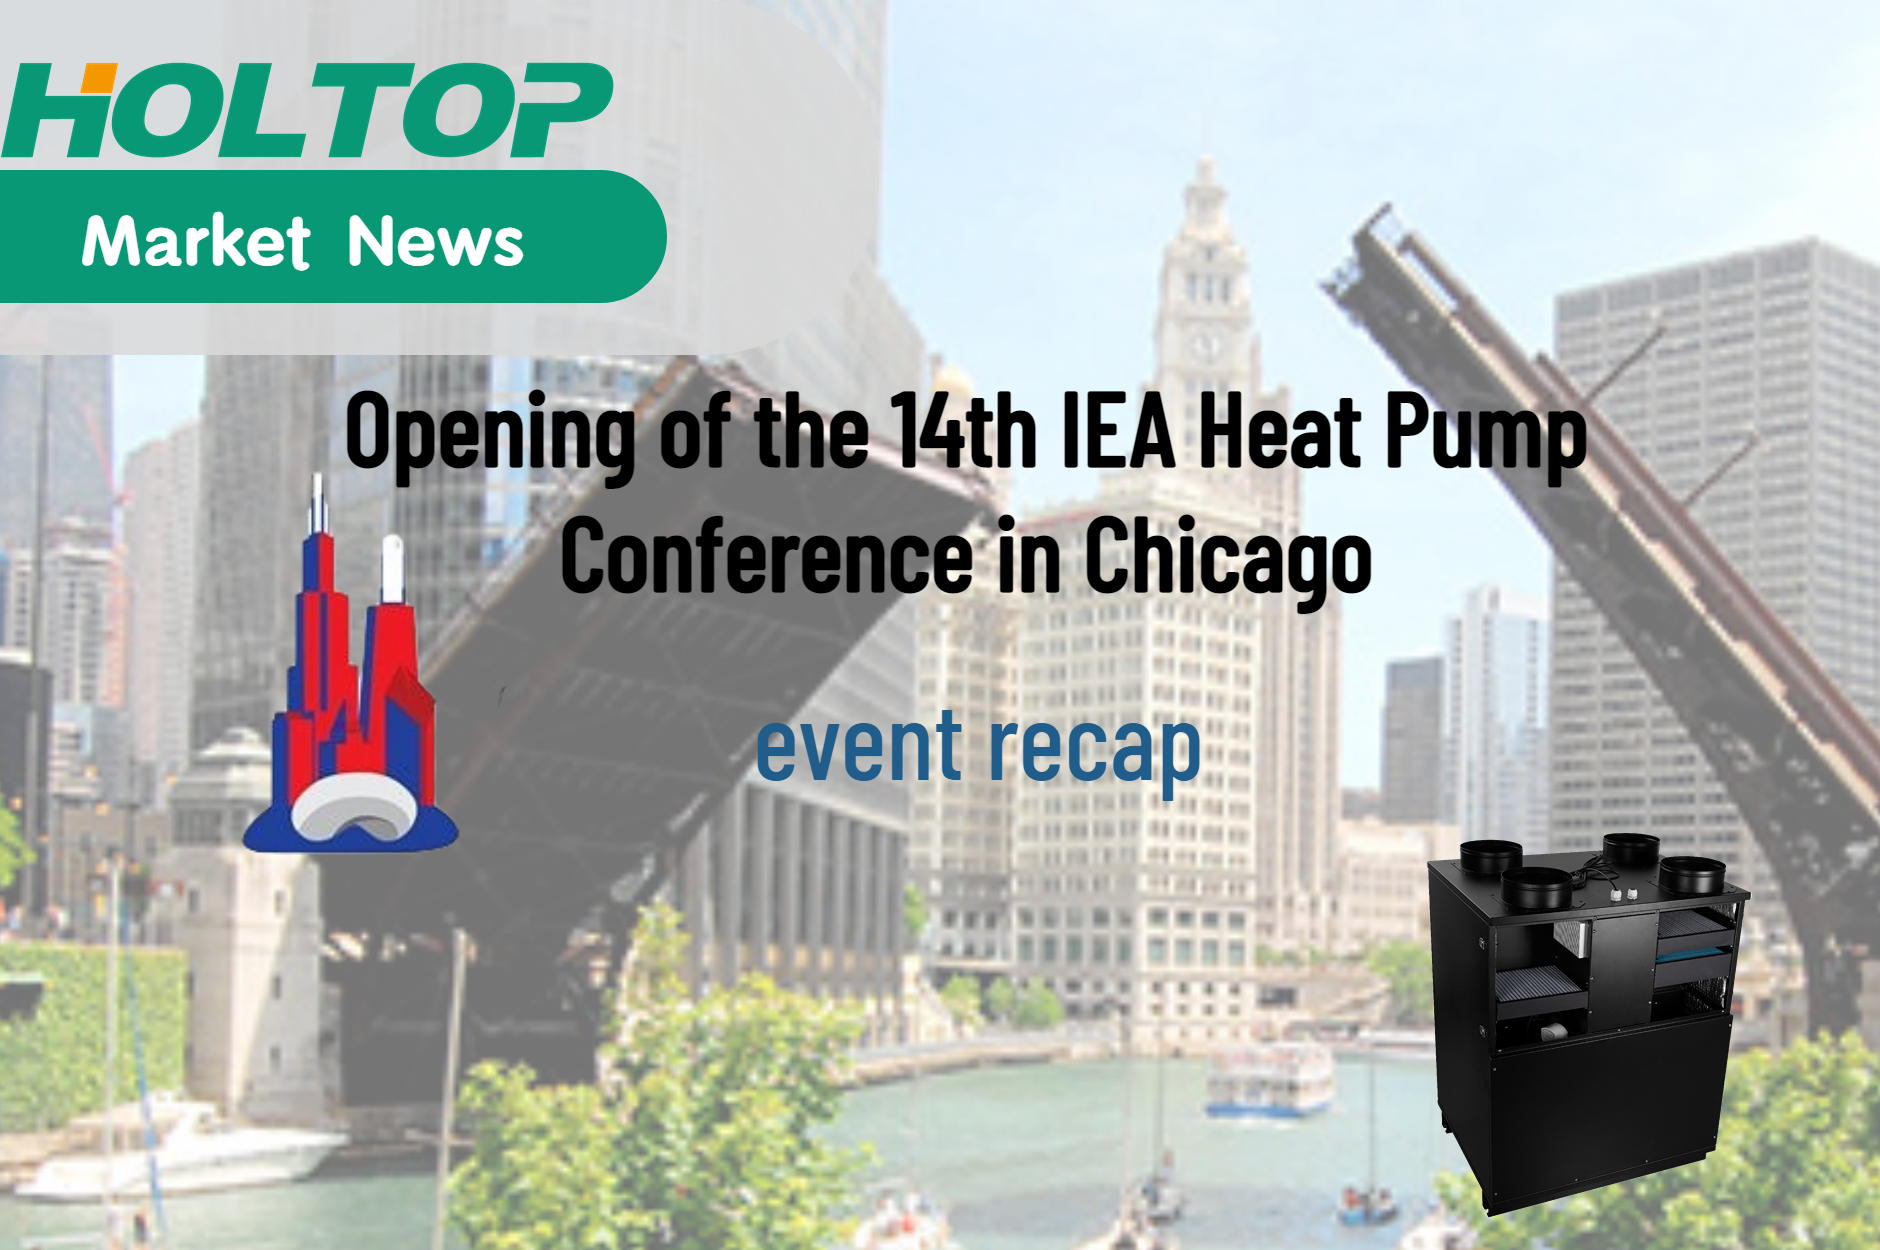 Opening of the 14th IEA Heat Pump Conference in Chicago